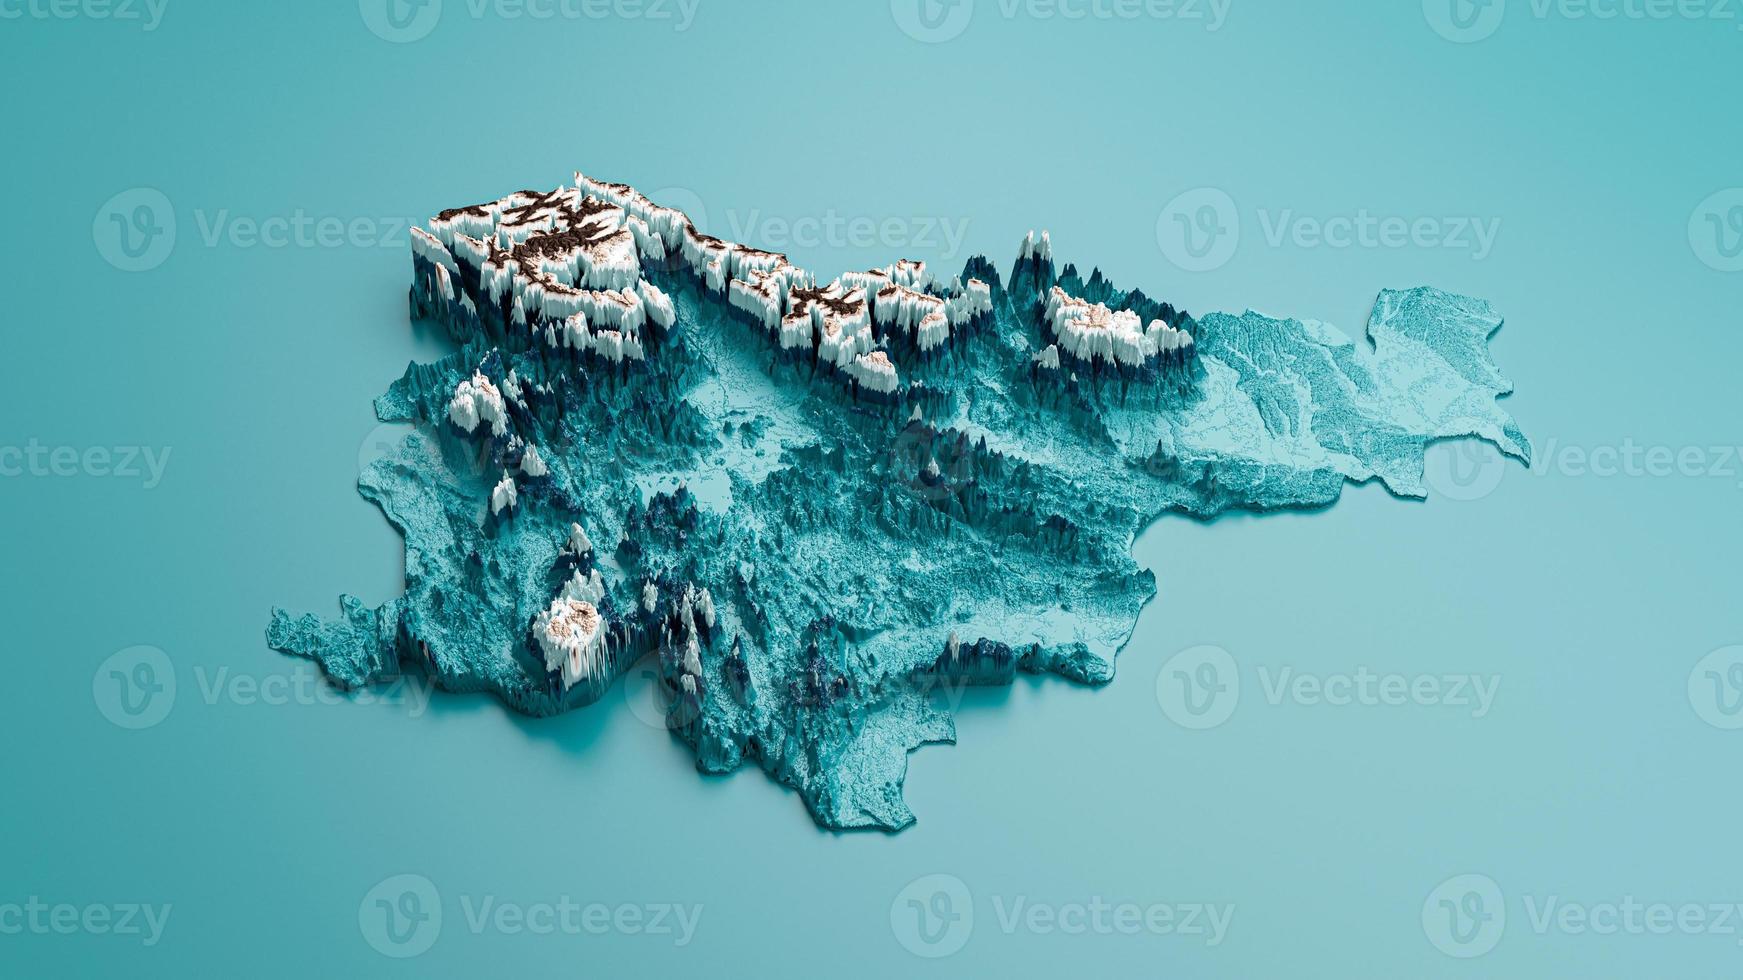 Topographic Slovenia Map Hypsometric Slovenia Elevation tint Spectral Shaded relief map 3d illustration photo